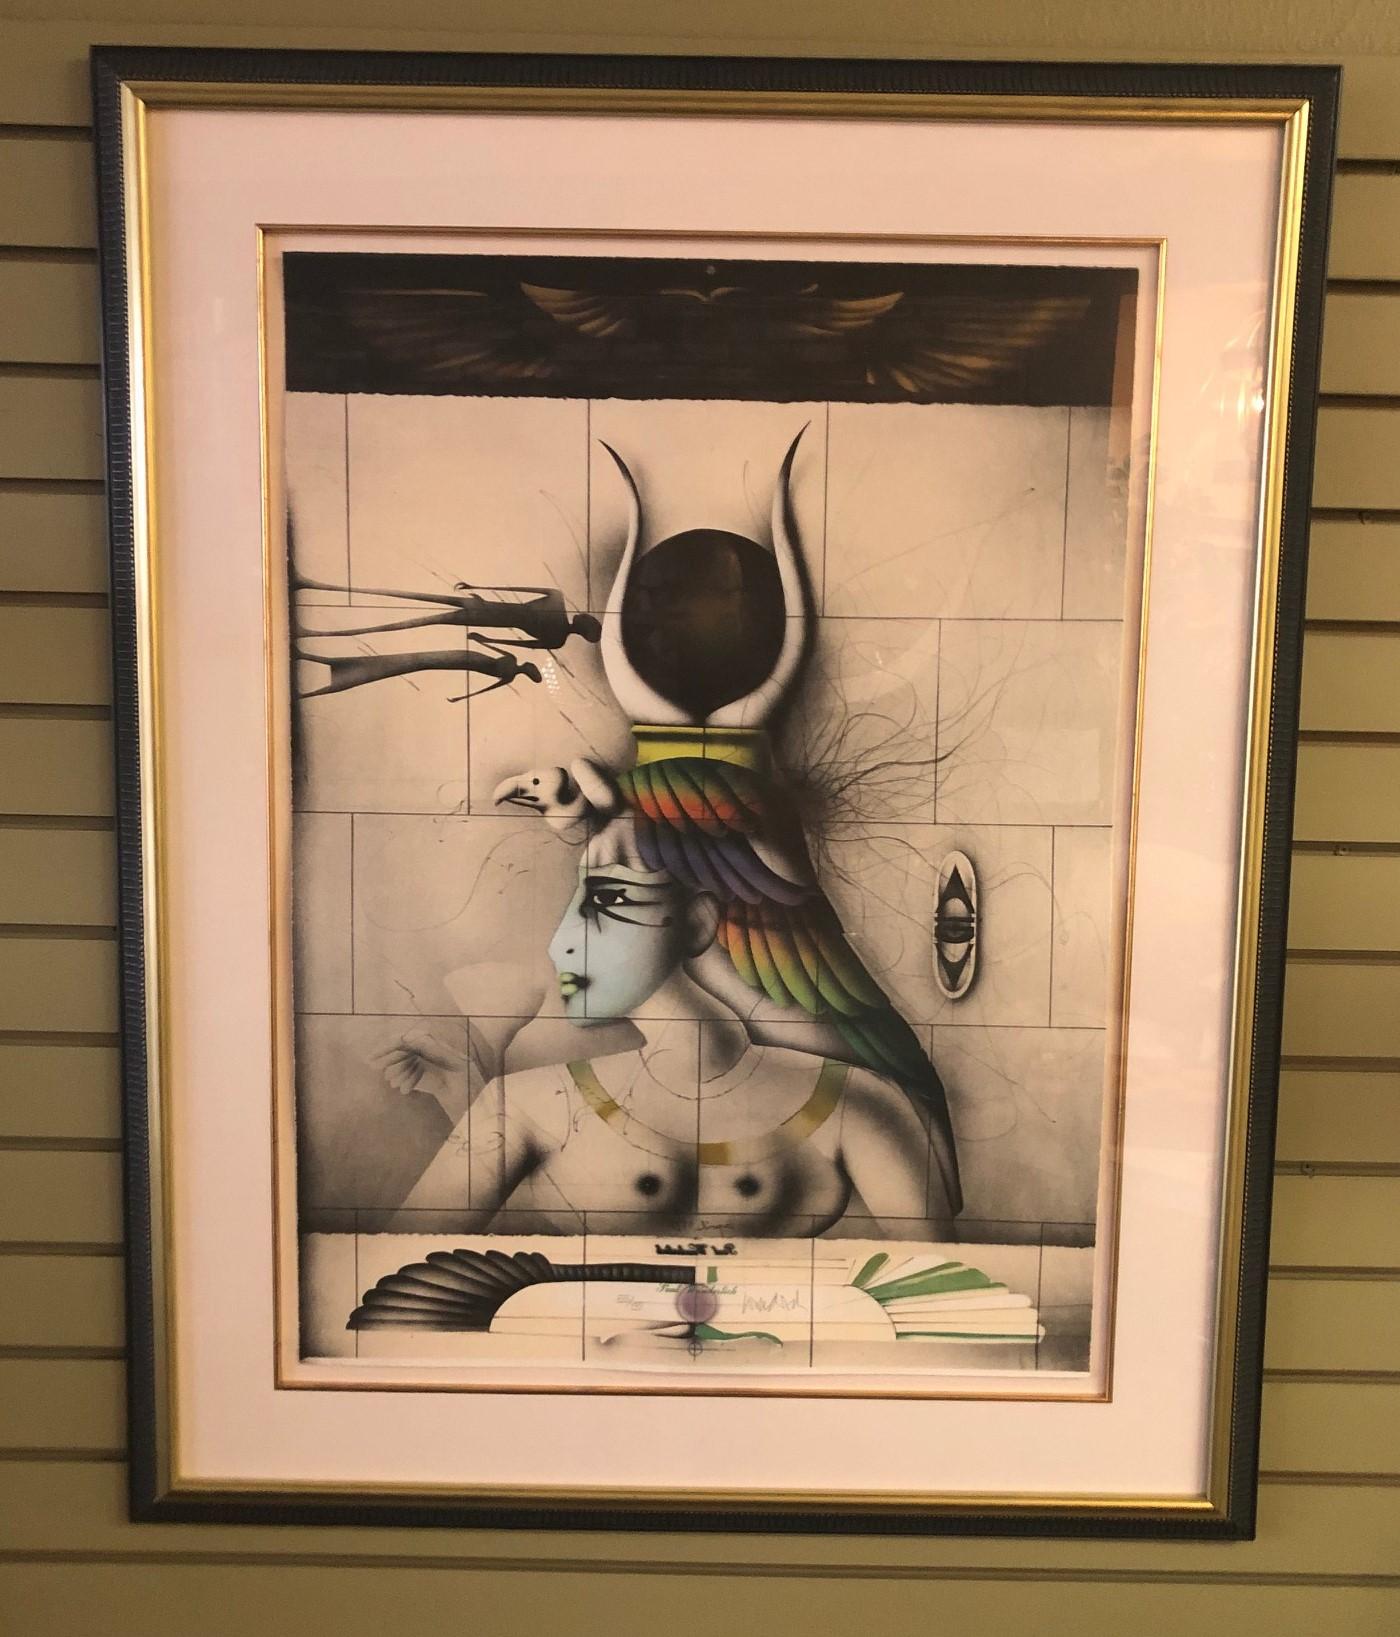 Artist: Paul Wunderlich, German (1927-2010)
Title: Aida
Year: 1978
Medium: Lithograph, signed and numbered in pencil
Edition: Artist Proof XVIII / XXV (18 / 25)
Size: 29.5